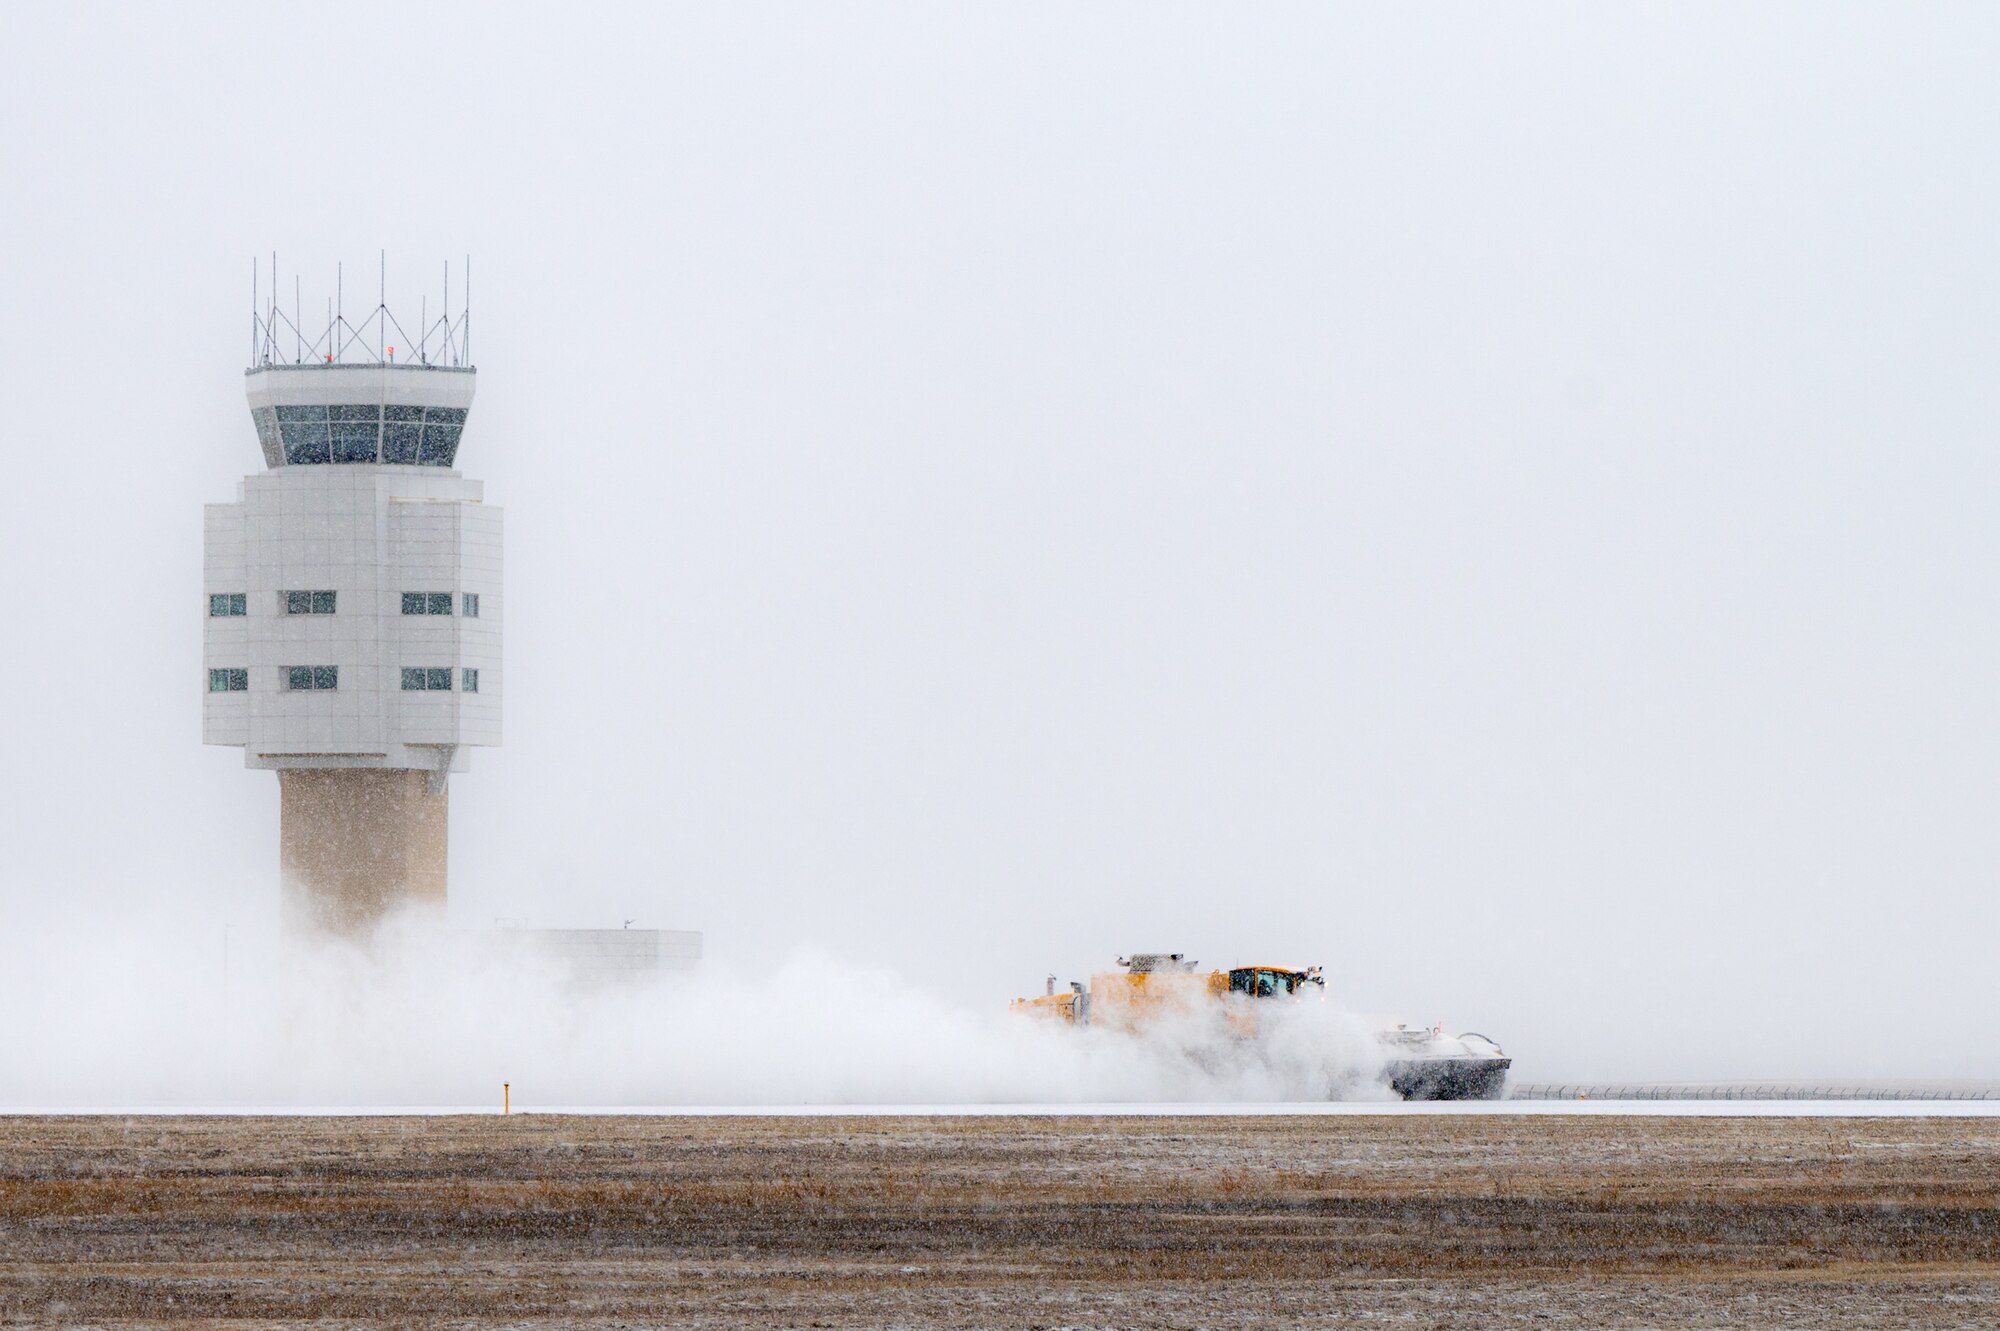 Members of the 5th Civil Engineer Squadron work to remove snow from the flight line at Minot Air Force Base, North Dakota, Nov. 27, 2023. The 5th CE tends to base snow removal efforts to prevent delays in base operations. (U.S. Air Force photo by Airman 1st Class Alexander Nottingham)